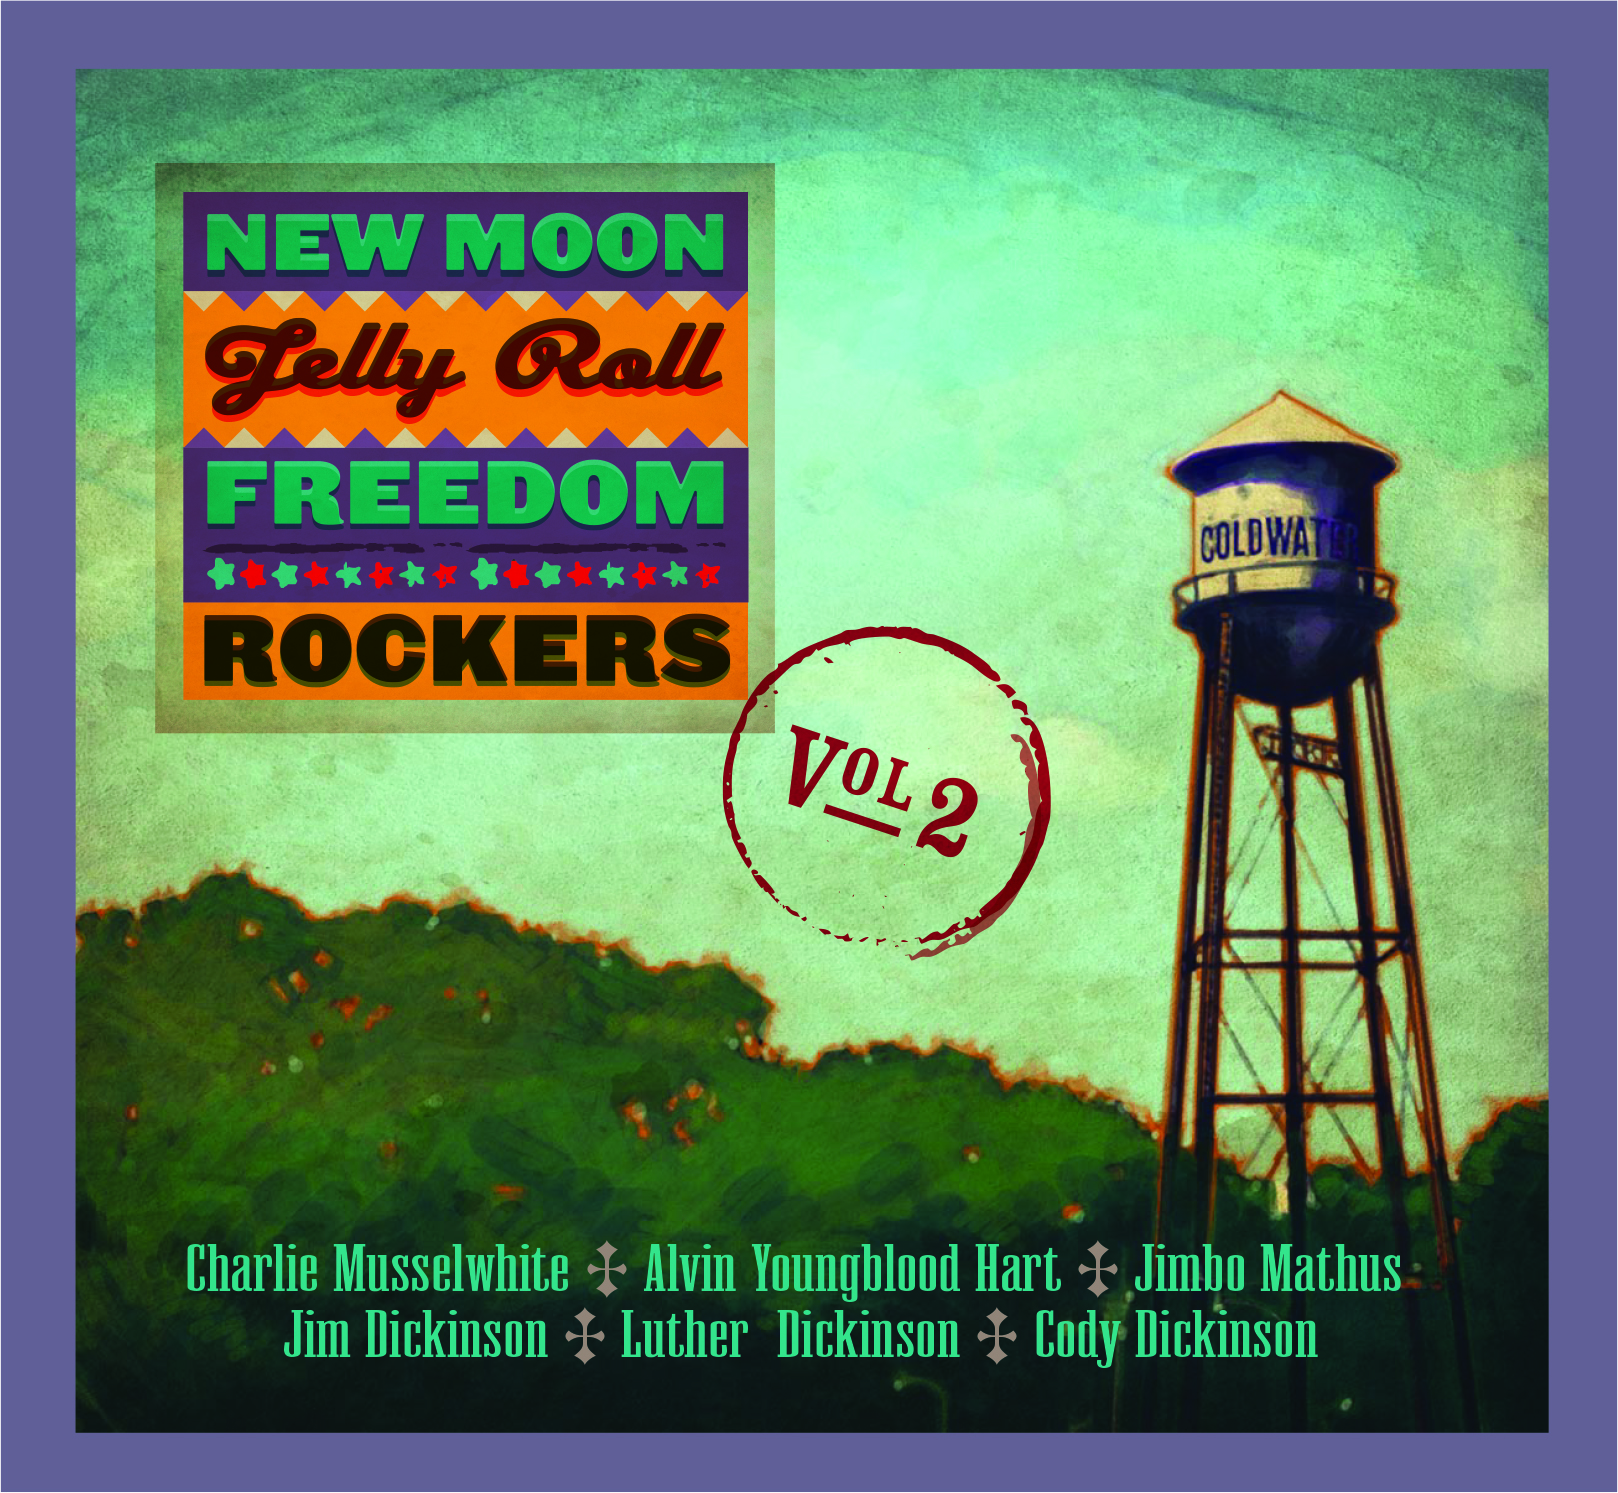 Charlie Musselwhite, Alvin Youngblood Hart, Jimbo Mathus, the Late Jim Dickinson, Luther Dickinson and Cody Dickinson Return as the "New Moon Jelly Roll Freedom Rockers Vol. 2"